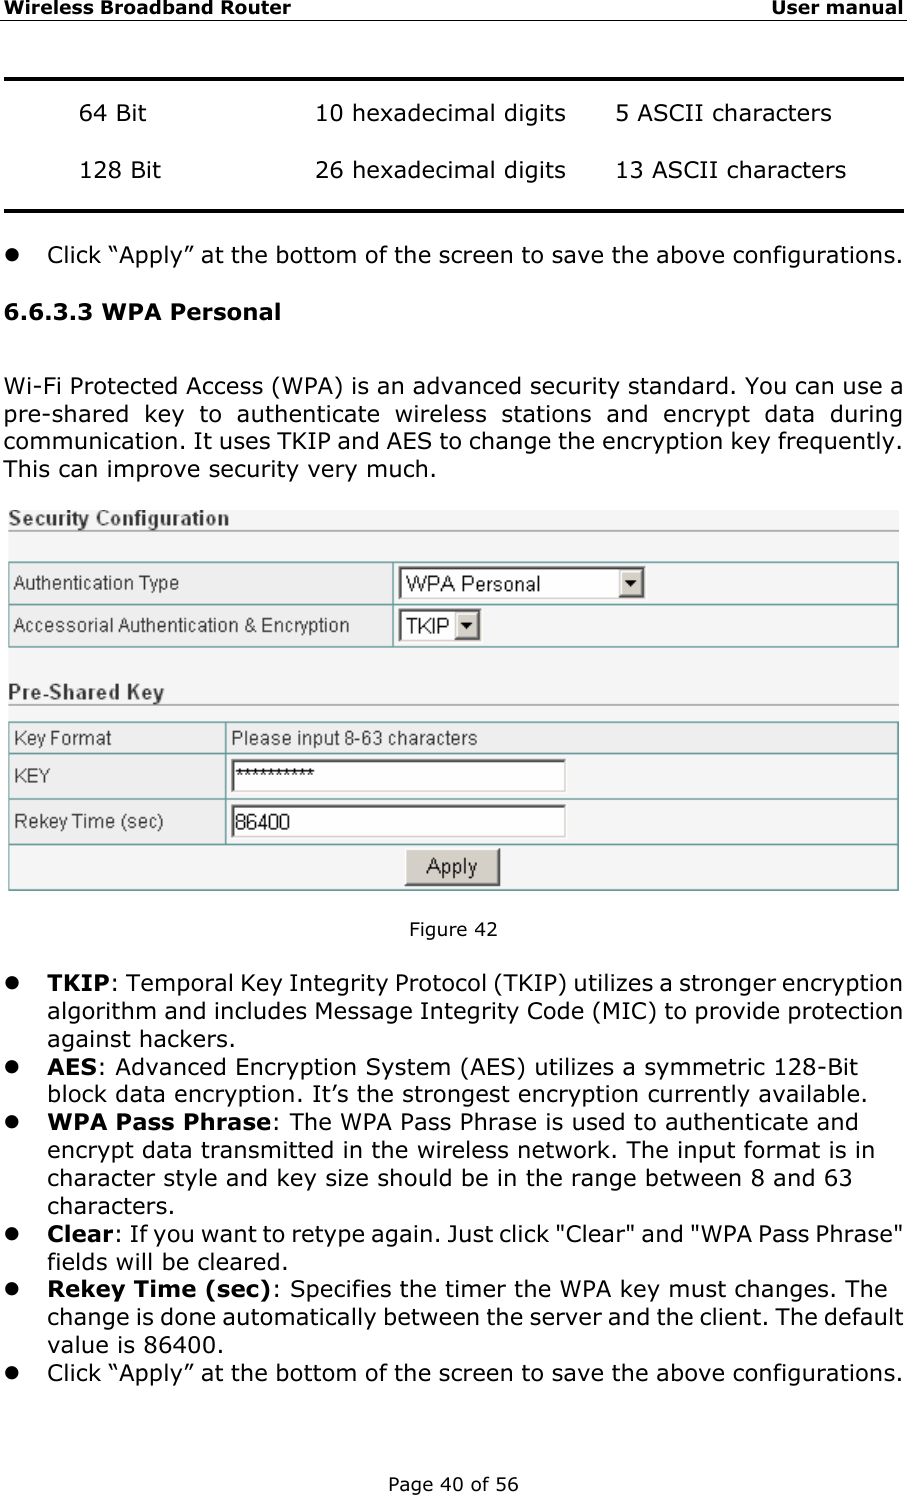 Wireless Broadband Router                                                   User manual Page 40 of 56  64 Bit  10 hexadecimal digits  5 ASCII characters  128 Bit  26 hexadecimal digits  13 ASCII characters   z Click “Apply” at the bottom of the screen to save the above configurations. 6.6.3.3 WPA Personal Wi-Fi Protected Access (WPA) is an advanced security standard. You can use a pre-shared key to authenticate wireless stations and encrypt data during communication. It uses TKIP and AES to change the encryption key frequently. This can improve security very much.    Figure 42  z TKIP: Temporal Key Integrity Protocol (TKIP) utilizes a stronger encryption algorithm and includes Message Integrity Code (MIC) to provide protection against hackers. z AES: Advanced Encryption System (AES) utilizes a symmetric 128-Bit block data encryption. It’s the strongest encryption currently available. z WPA Pass Phrase: The WPA Pass Phrase is used to authenticate and encrypt data transmitted in the wireless network. The input format is in character style and key size should be in the range between 8 and 63 characters. z Clear: If you want to retype again. Just click &quot;Clear&quot; and &quot;WPA Pass Phrase&quot; fields will be cleared. z Rekey Time (sec): Specifies the timer the WPA key must changes. The change is done automatically between the server and the client. The default value is 86400. z Click “Apply” at the bottom of the screen to save the above configurations. 